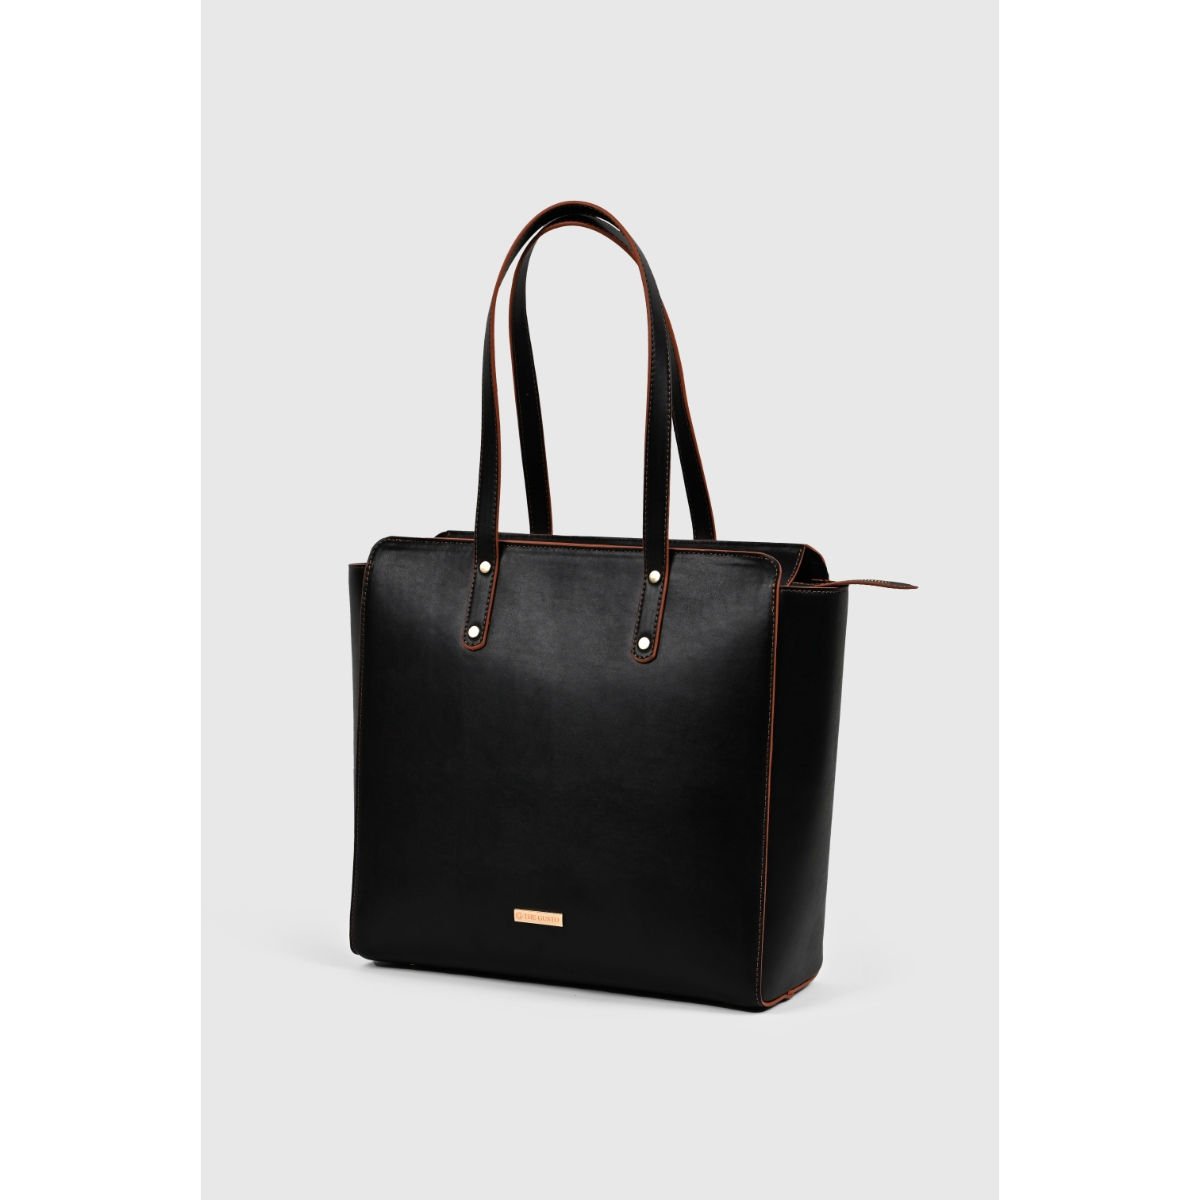 Women Tote Bag, Leather Bag, Leather Purse | Mayko Bags